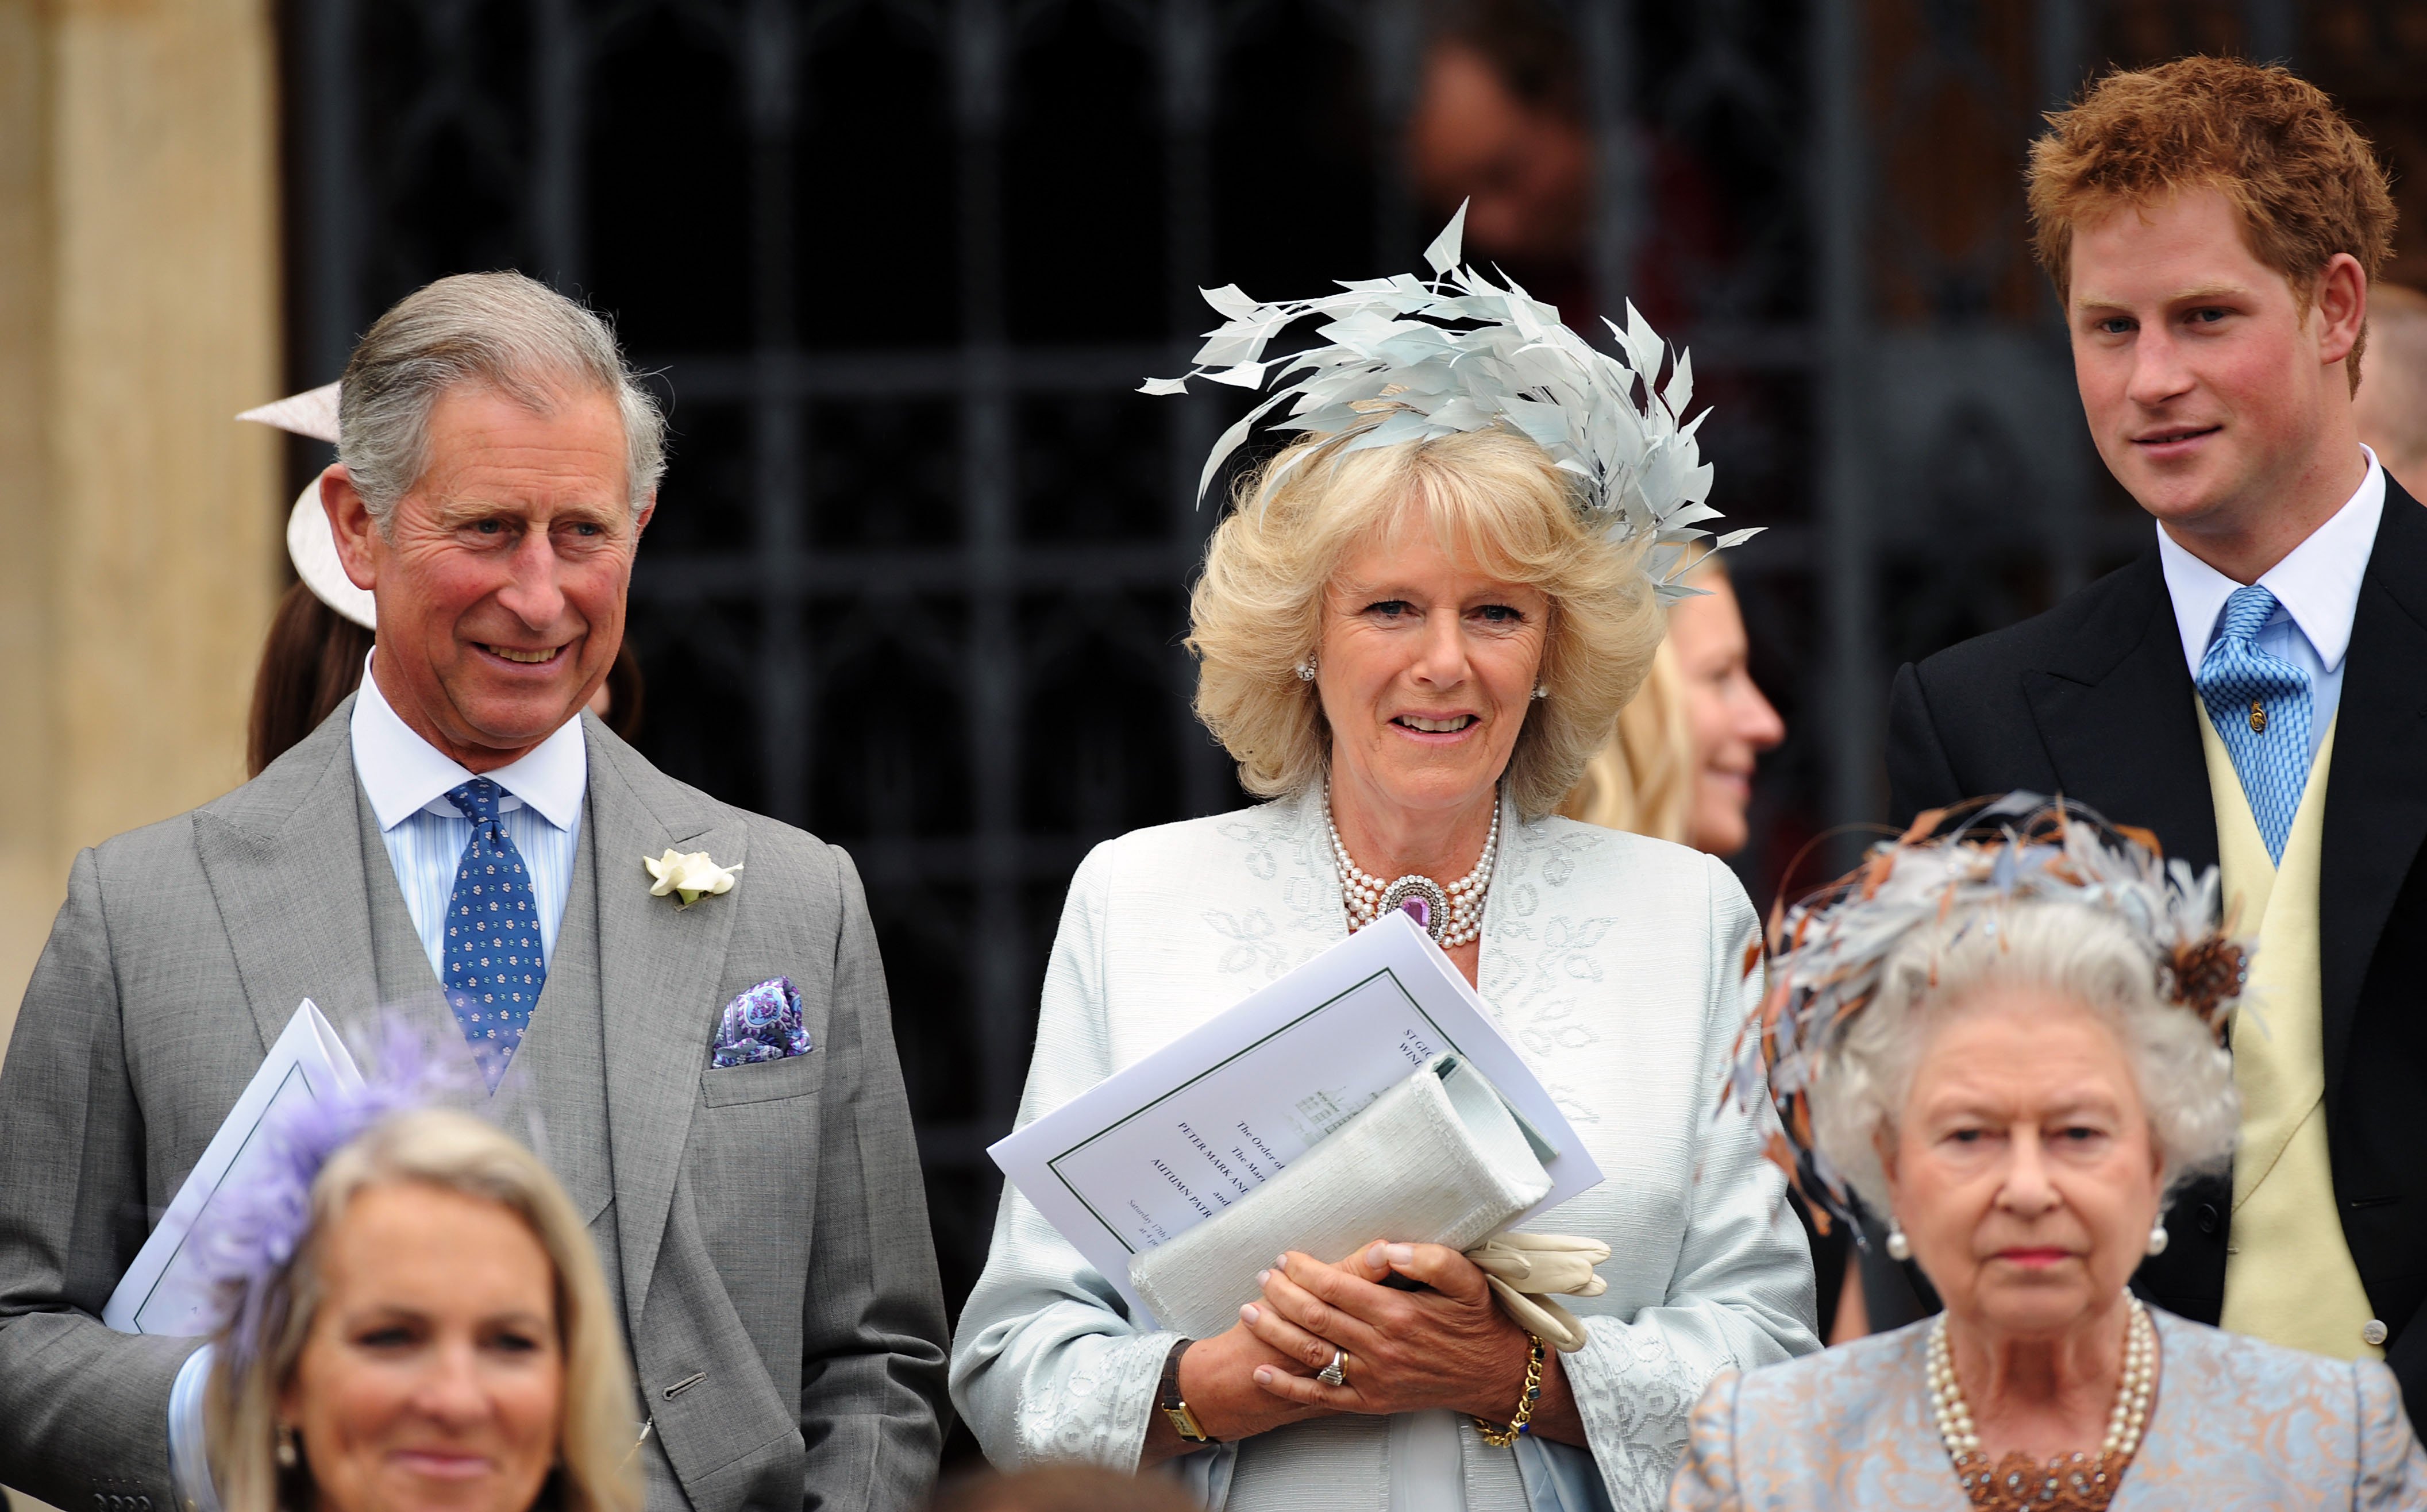 Prince Charles, Camilla Parker Bowles, Prince Harry, and Queen Elizabeth II attending Peter Phillips and Autumn Kelly's wedding